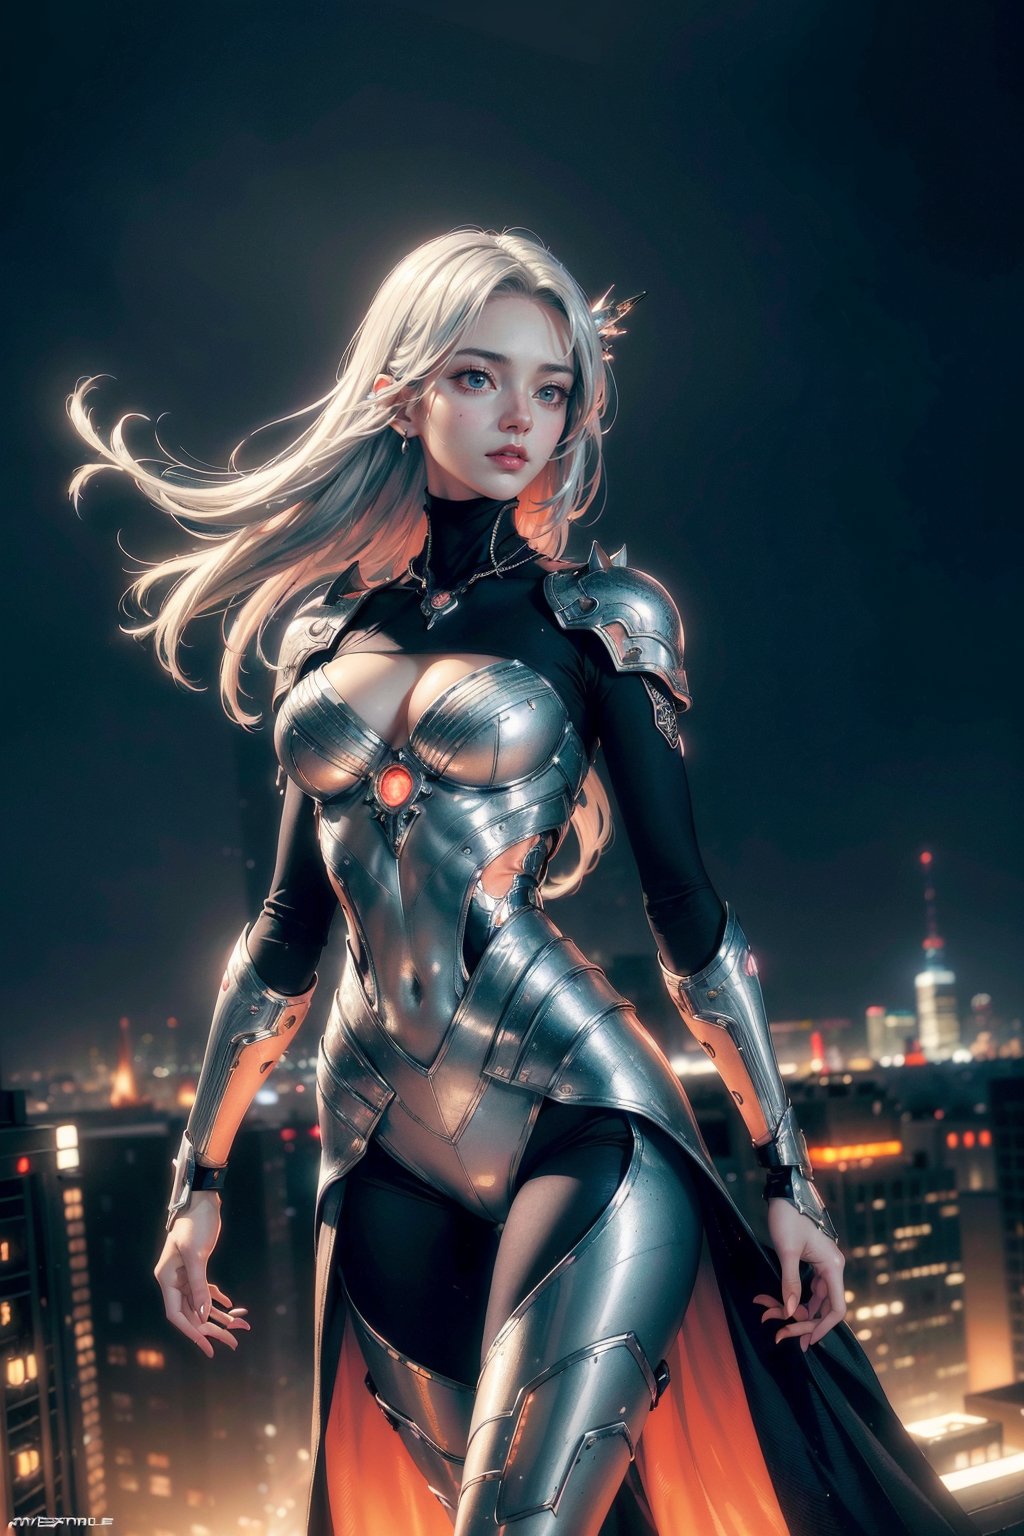 (masterpiece:1.2, best quality:1.2, beautiful, high quality, highres:1.1, aesthetic), detailed, extremely detailed, cowboy shot, ambient soft lighting, perfect eyes, perfect face, 1girl, long hair, hair ornament, normal breasts, silver cybernetic, silver cybernetic_enhancements, silver cybernetic amor, spikes amor shoulder, looking at the viewer, above view, top view, slim body, futuristic cities, sexy pose, erotic pose, full_body, silver, night time,exposure blend, medium shot, bokeh, (hdr:1.4), high contrast, (cinematic, teal and orange:0.85), (muted colors, dim colors, soothing tones:1.3), low saturation, (hyperdetailed:1.2), (noir:0.4)